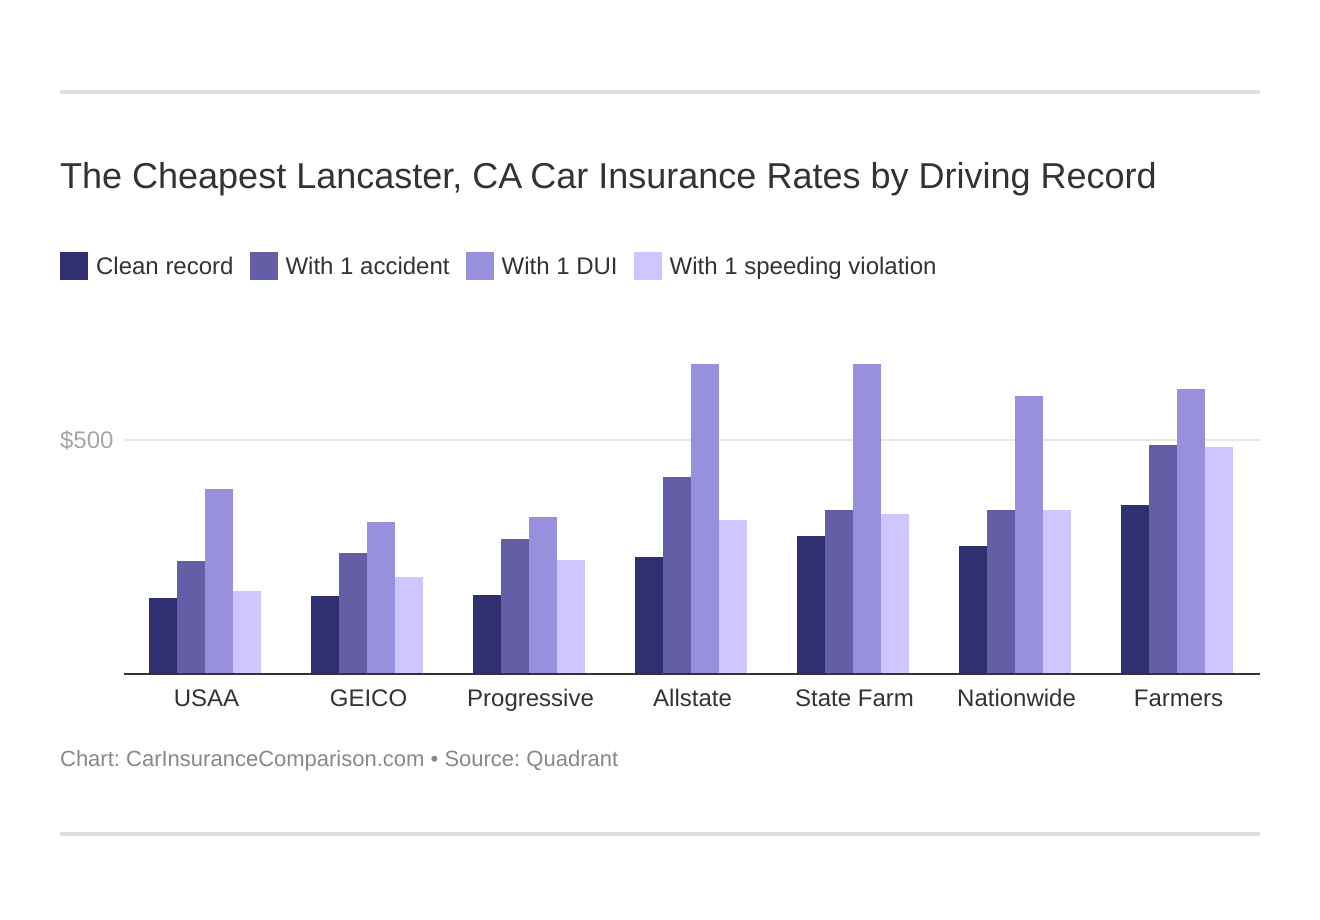 The Cheapest Lancaster, CA Car Insurance Rates by Driving Record